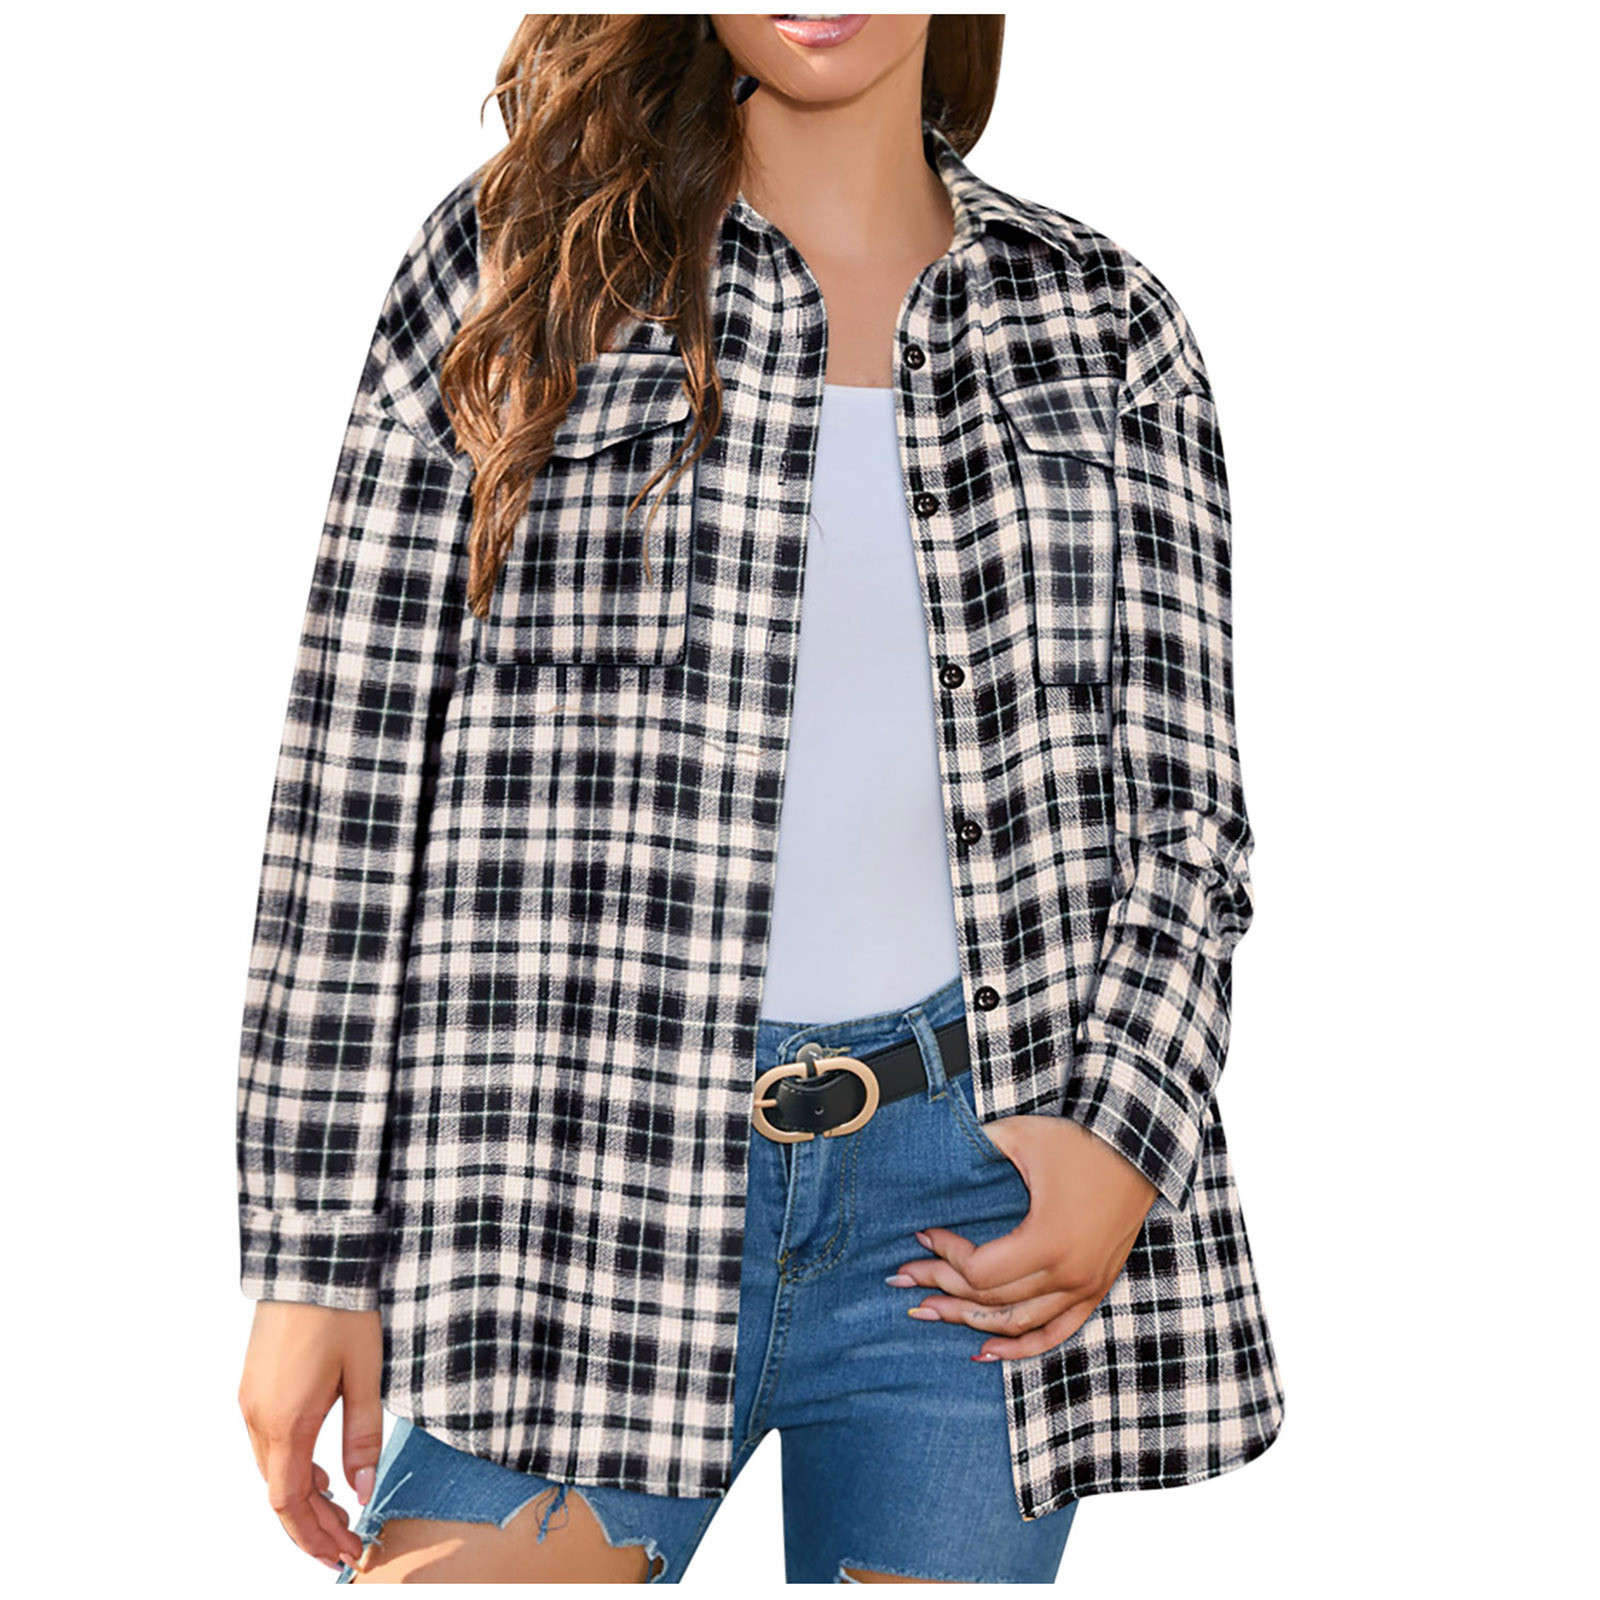 absuyy Jackets for Women Plaid Shacket Button Down Lapel with Pockets ...